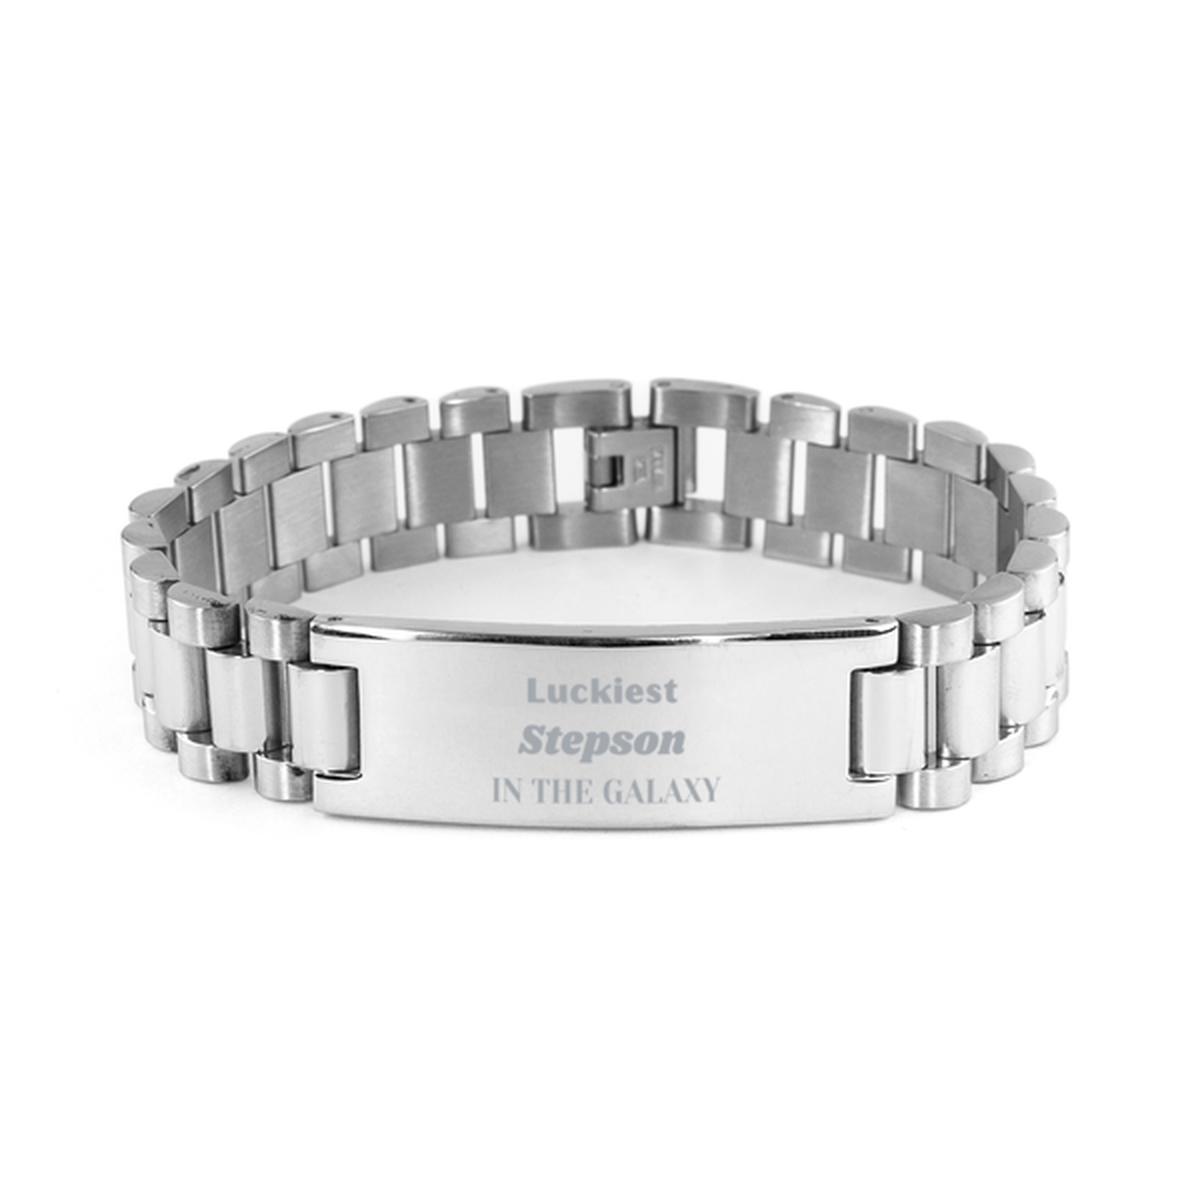 Luckiest Stepson in the Galaxy, To My Stepson Engraved Gifts, Christmas Stepson Ladder Stainless Steel Bracelet Gifts, X-mas Birthday Unique Gifts For Stepson Men Women